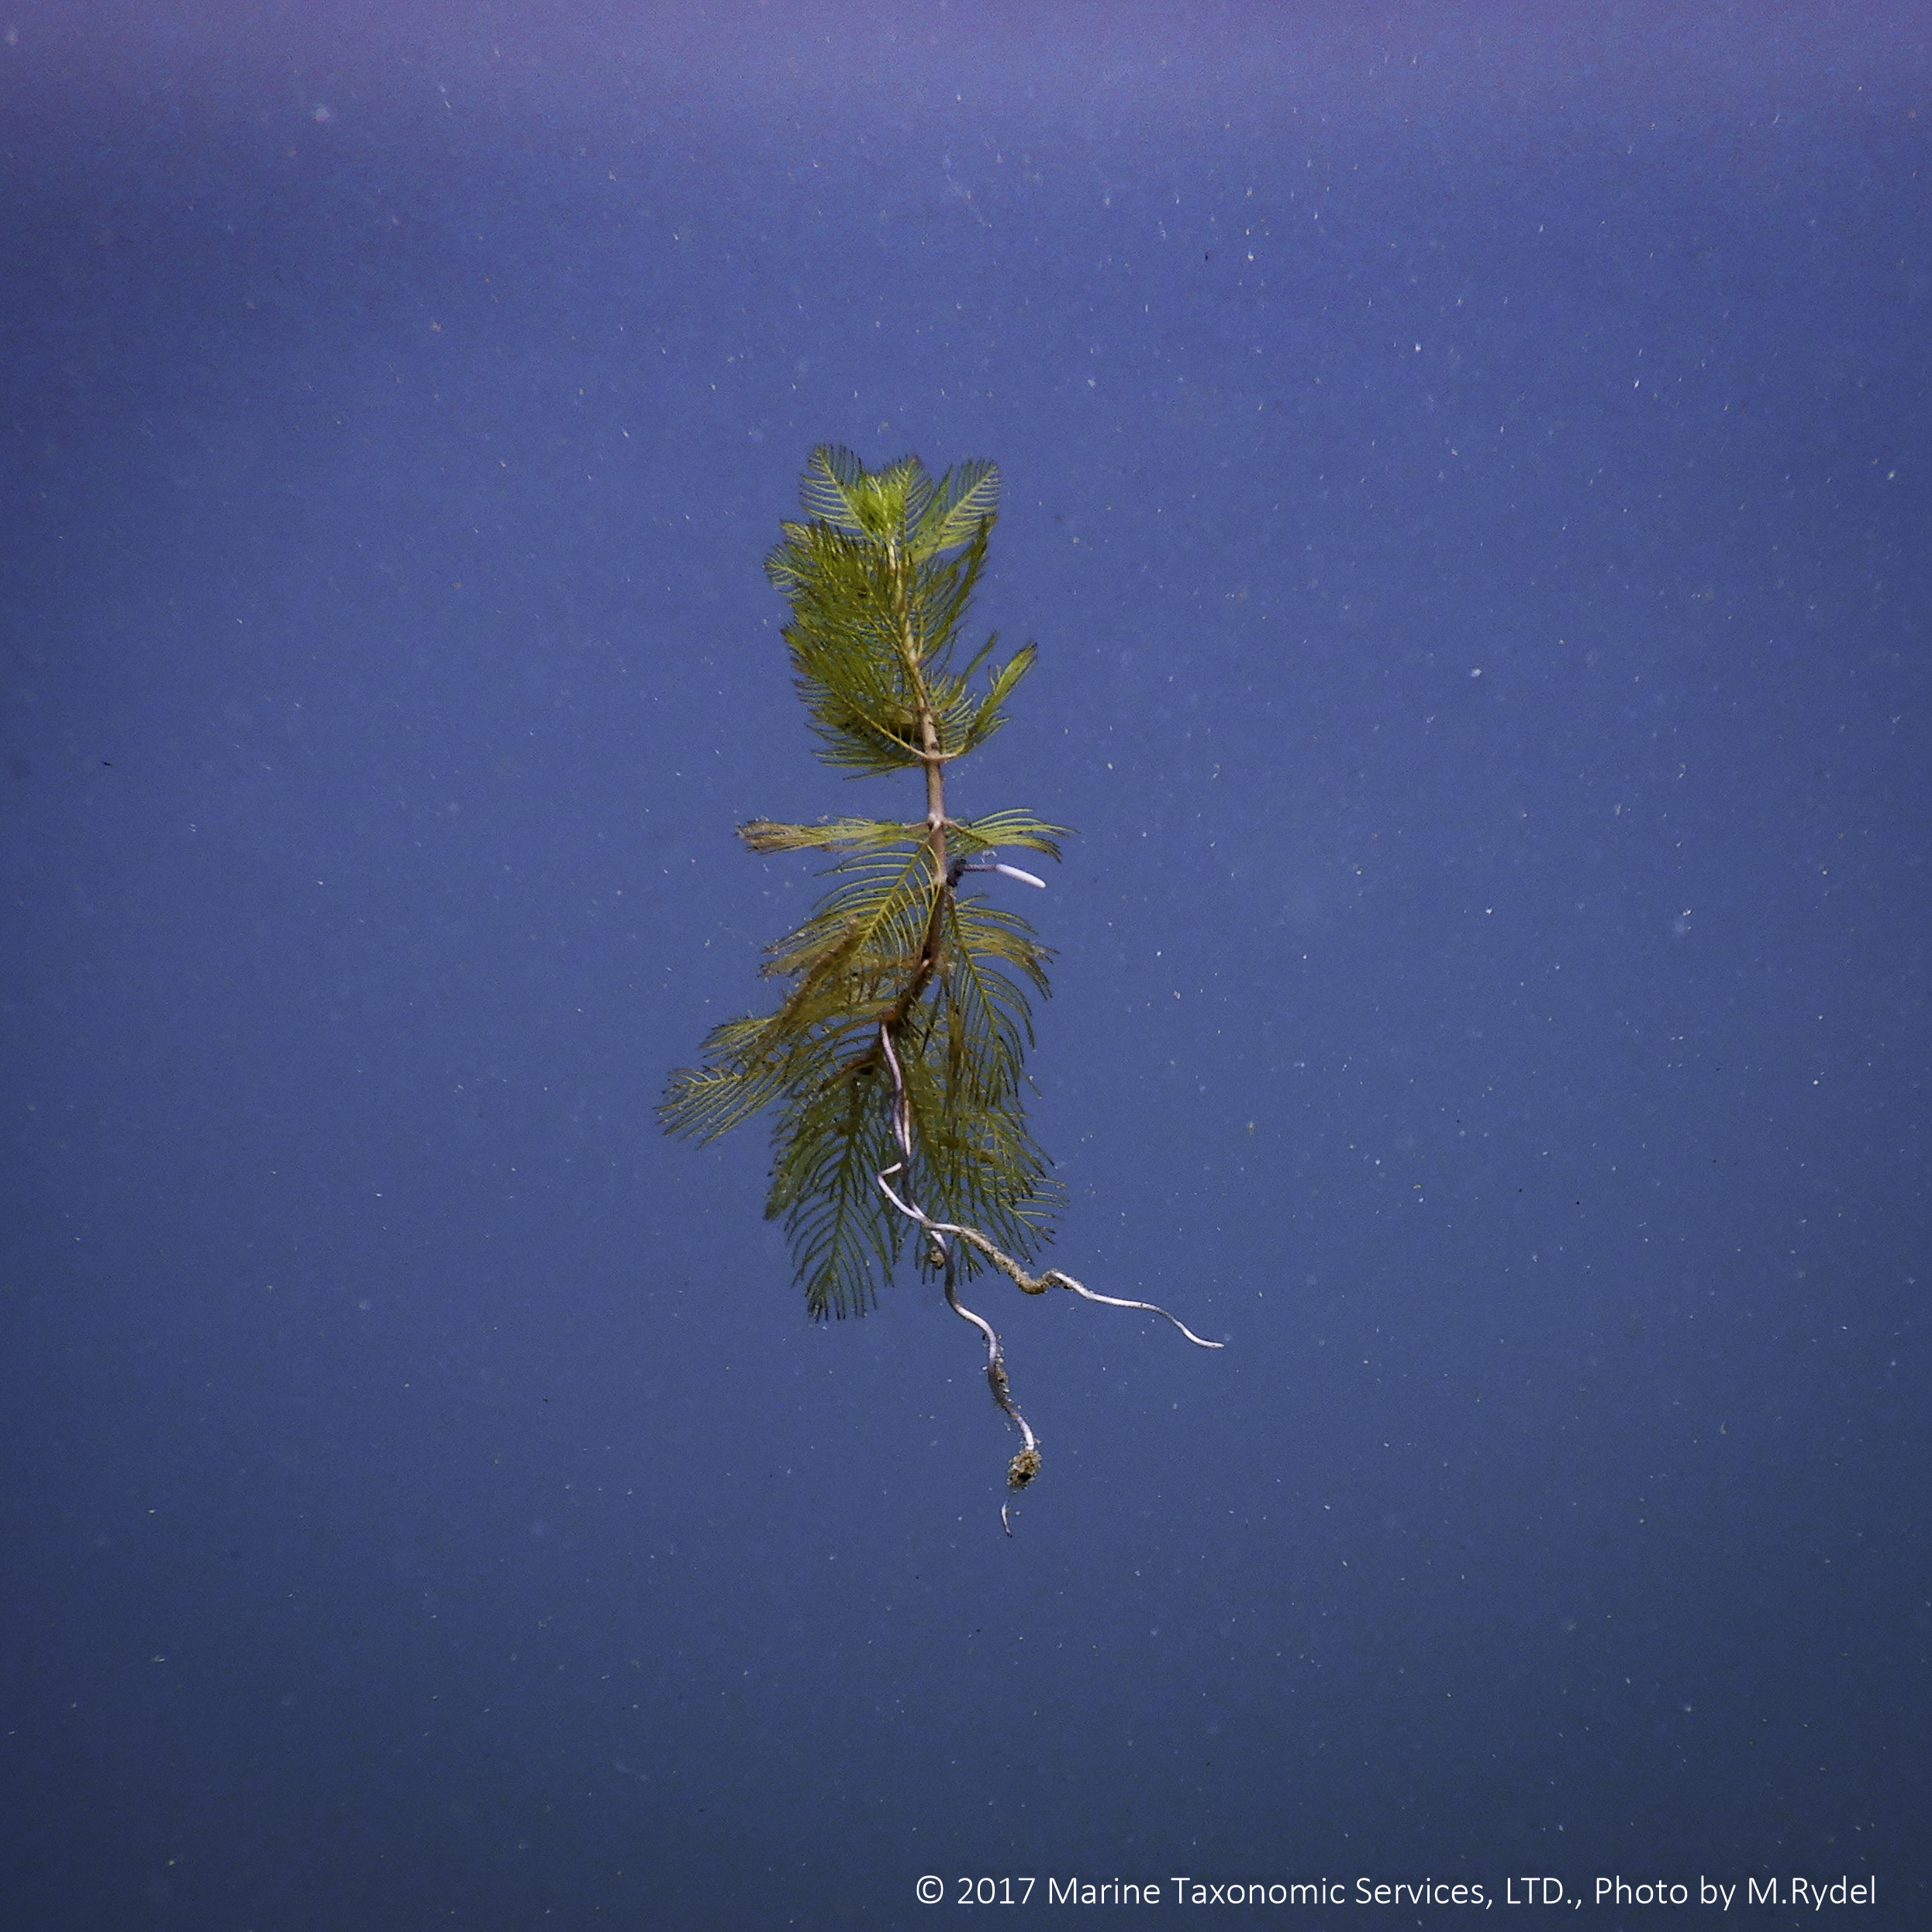 Image shows an Eurasian watermilfoil fragment suspended in blue water.